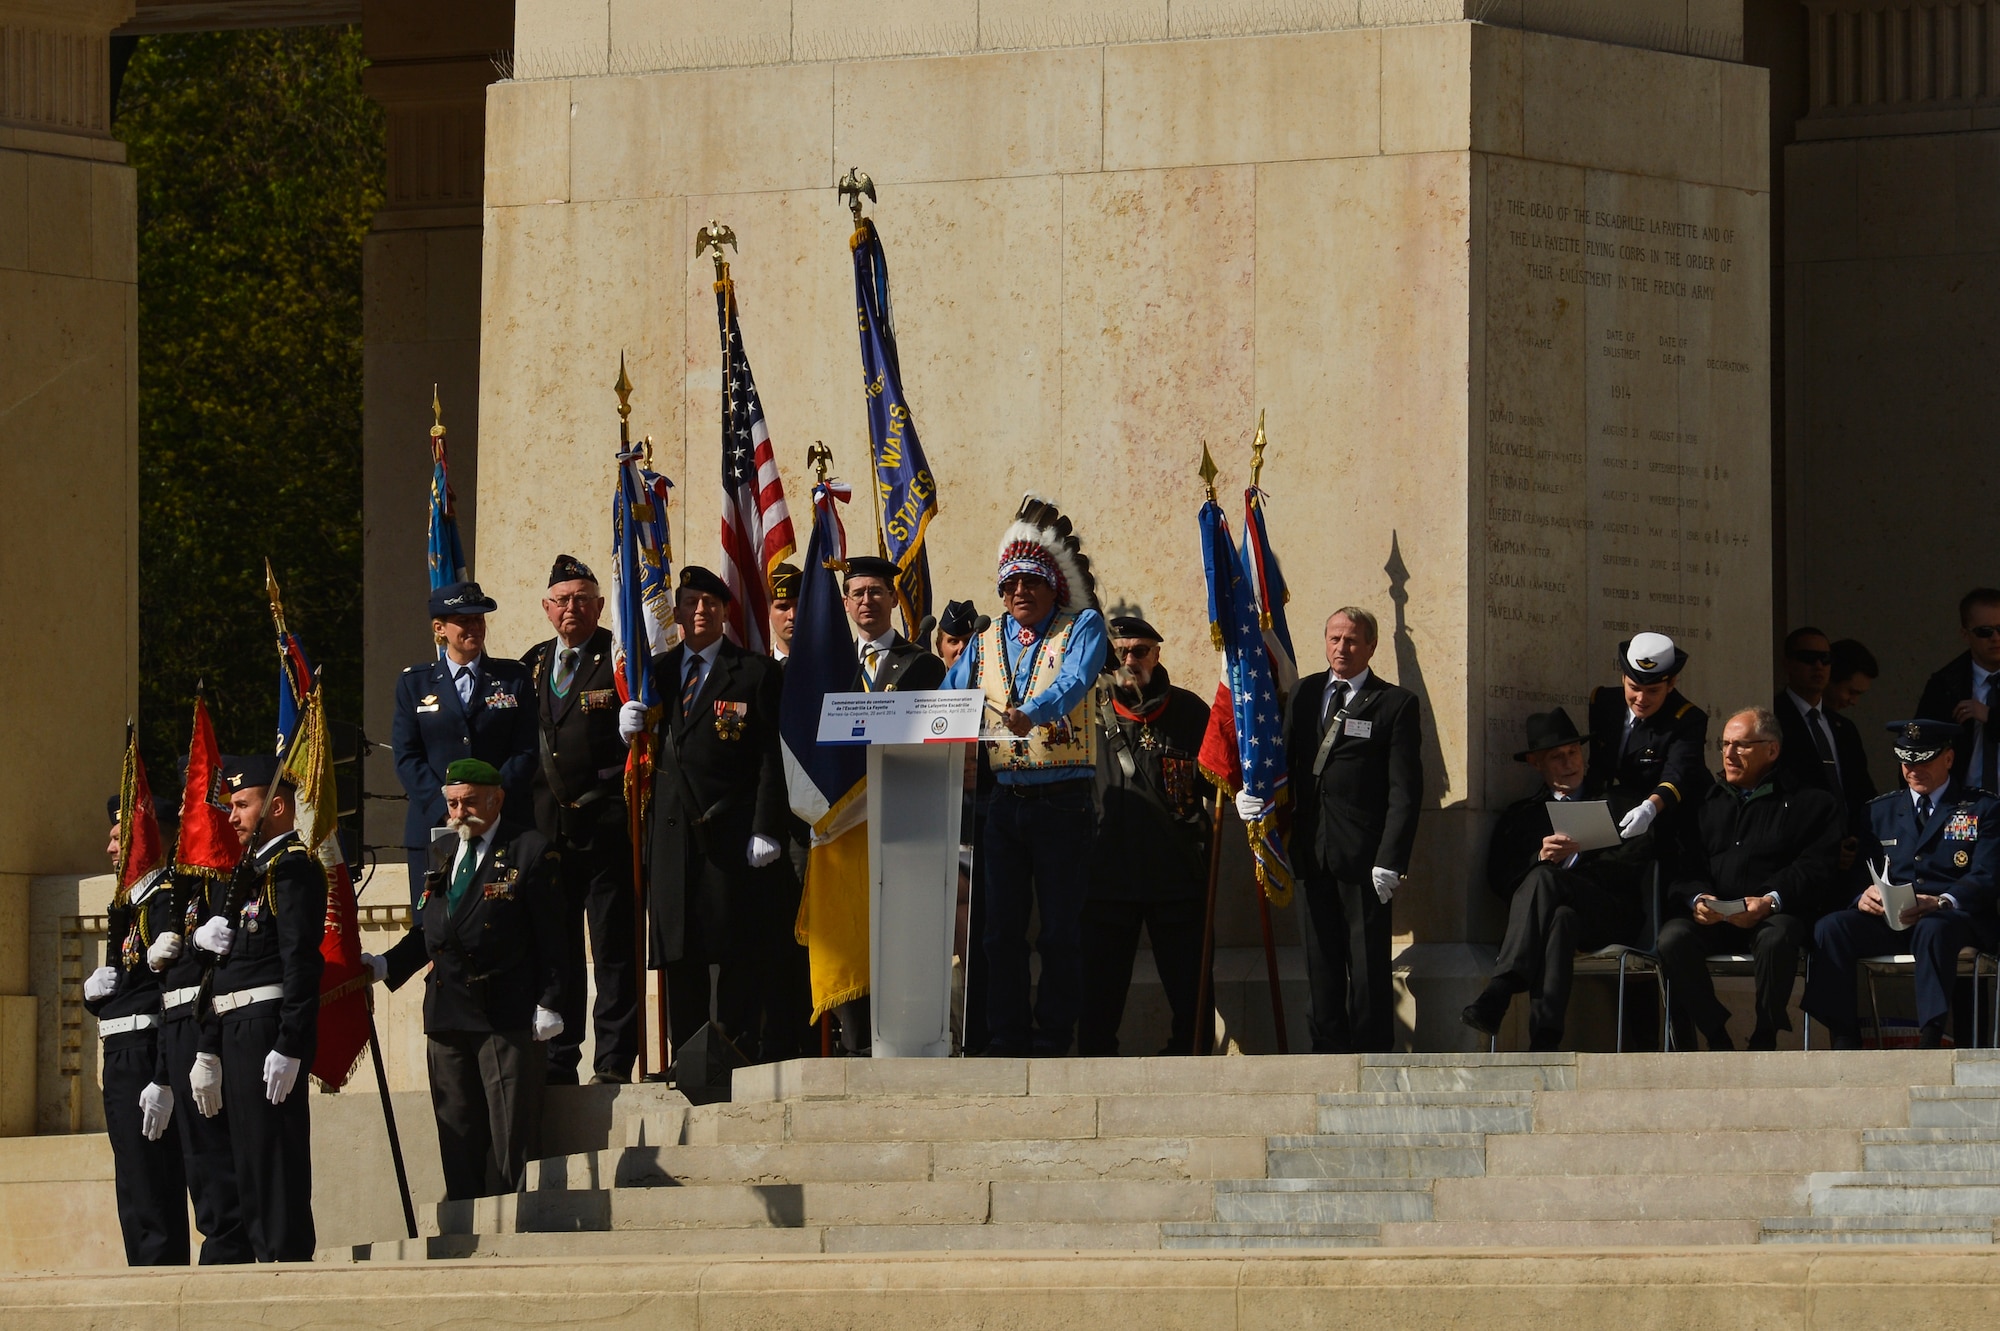 PARIS – John Yellow Bird Steele, representing the Sioux Nation, offers a traditional Native American incantation during the Lafayette Escadrille Memorial 100th anniversary ceremony in Marnes-la-Coquette, France, April 20, 2016. More than 200 Americans flew with France in the Lafayette Flying Corps prior to U.S. entry into World War I. Airmen from the U.S. Air Force and their French counterparts, along with civilians from both countries attended the ceremony to honor the men who served and the sacrifices of the 68 American airmen who died fighting with the French in World War I. The memorial highlights the 238-year alliance between the U.S. and France with their long history of shared values and sacrifice. (U.S. Air Force Photo by Tech. Sgt. Joshua DeMotts/Released)